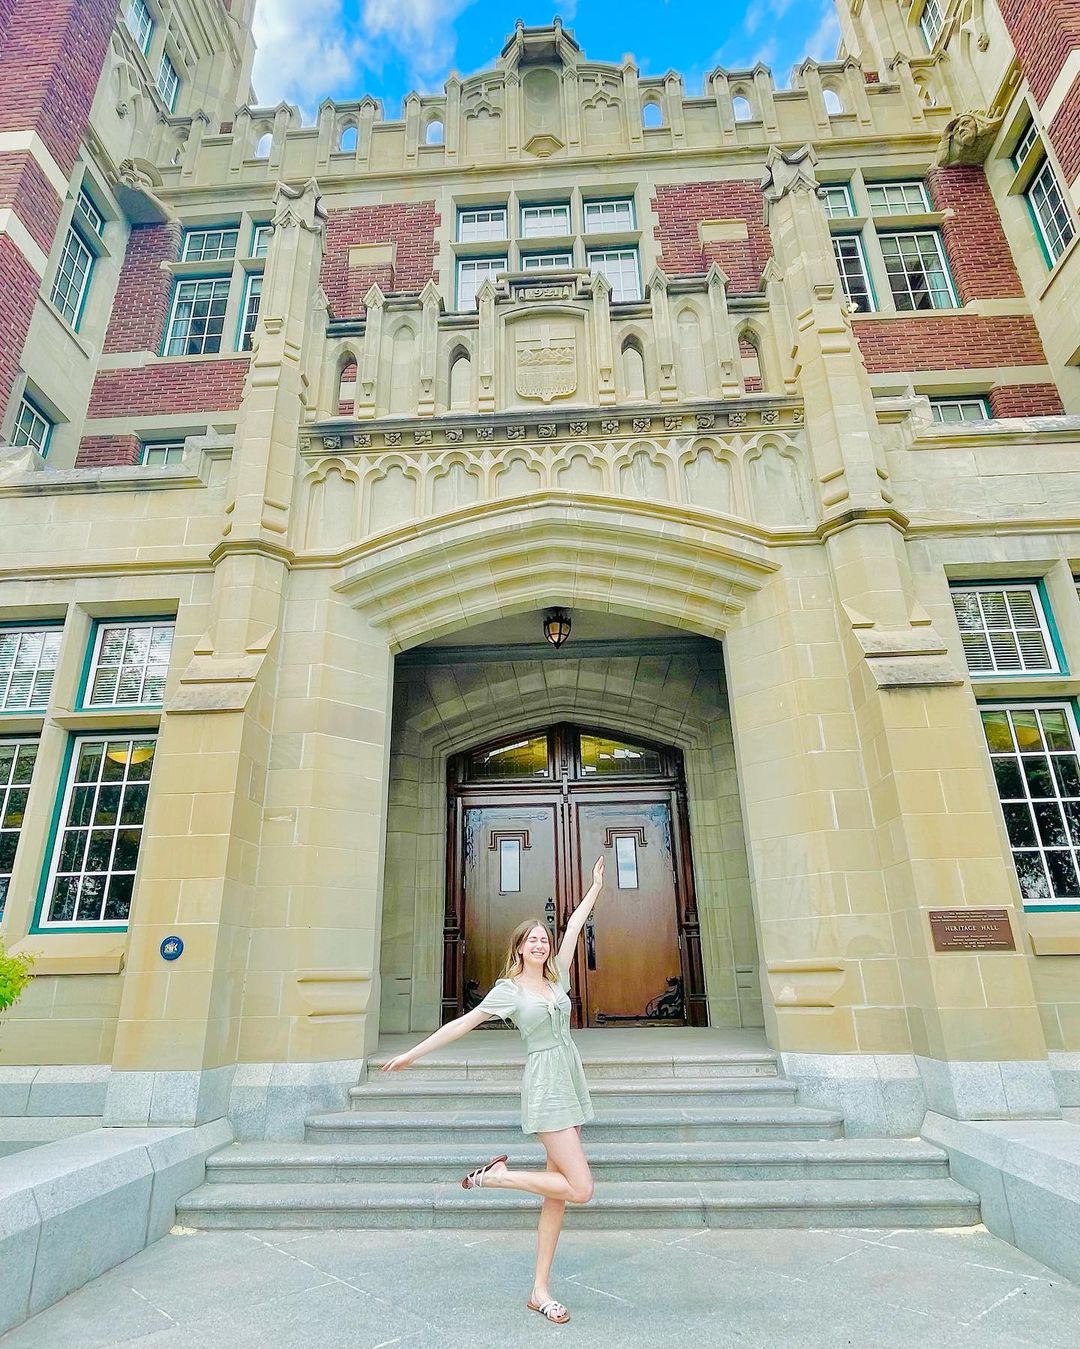 SAIT student posing in front of heritage hall